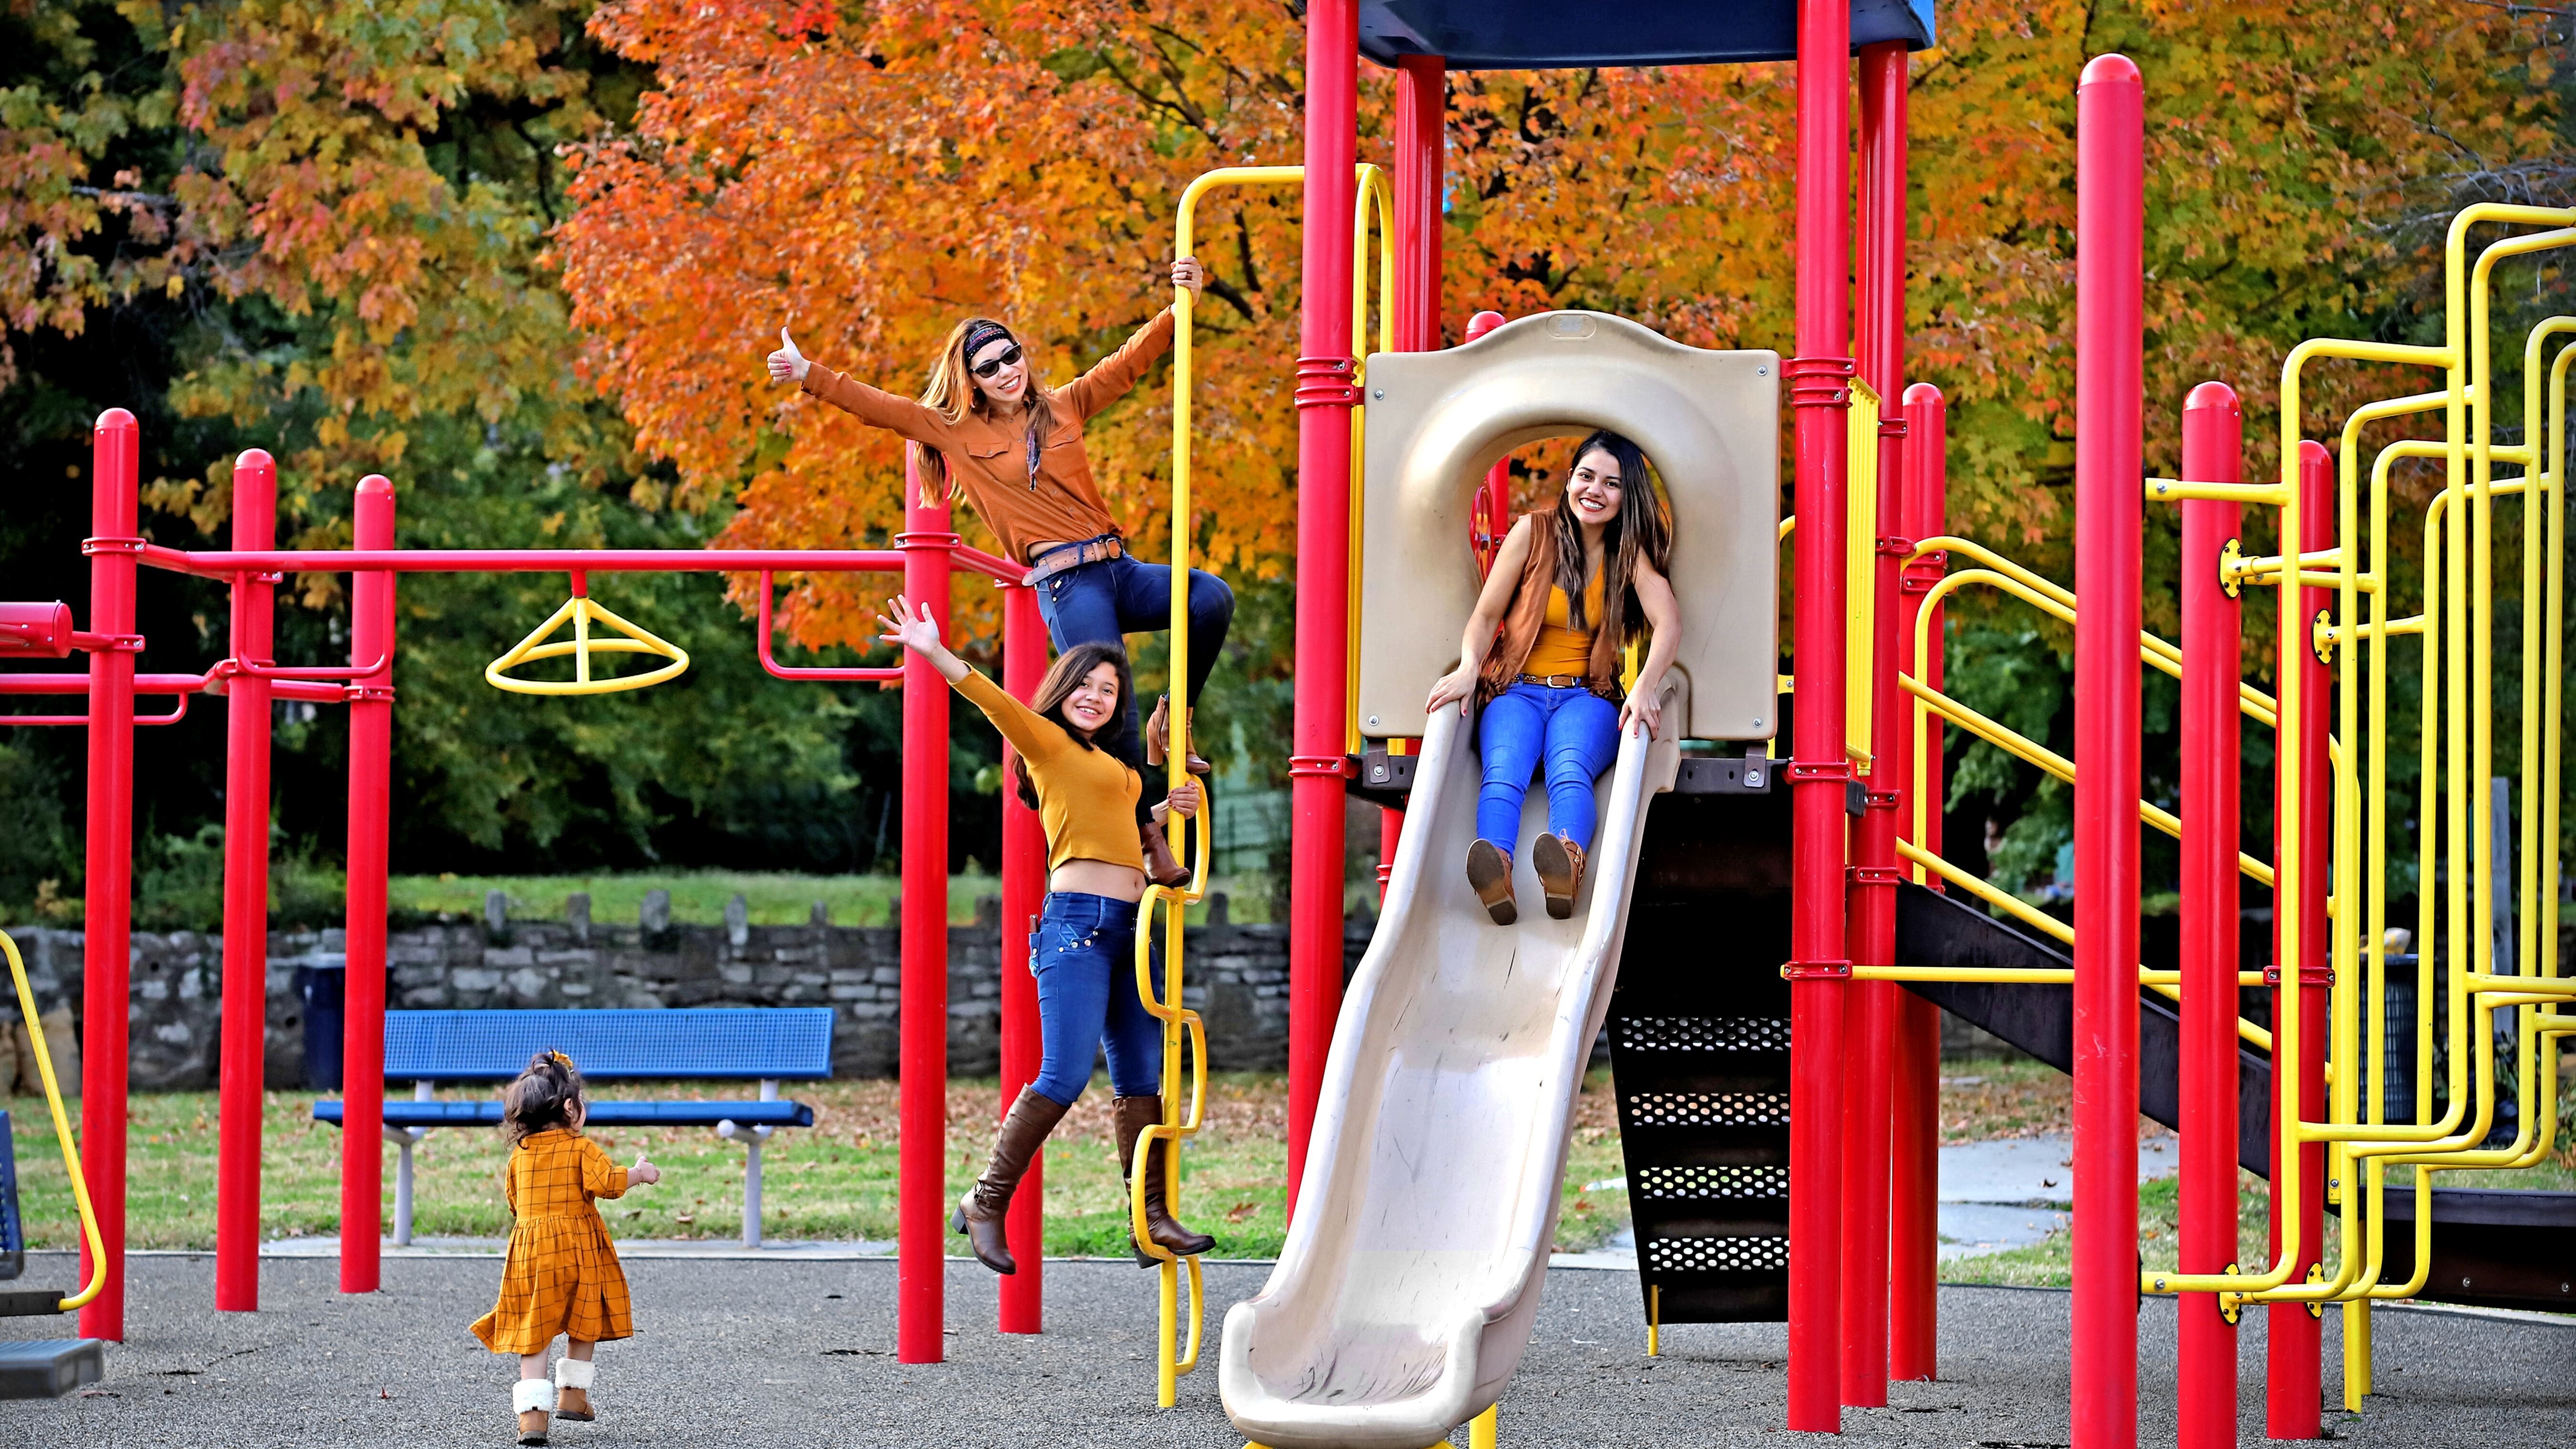 People dressed in fall colors posing for a picture in the fall on the slide set